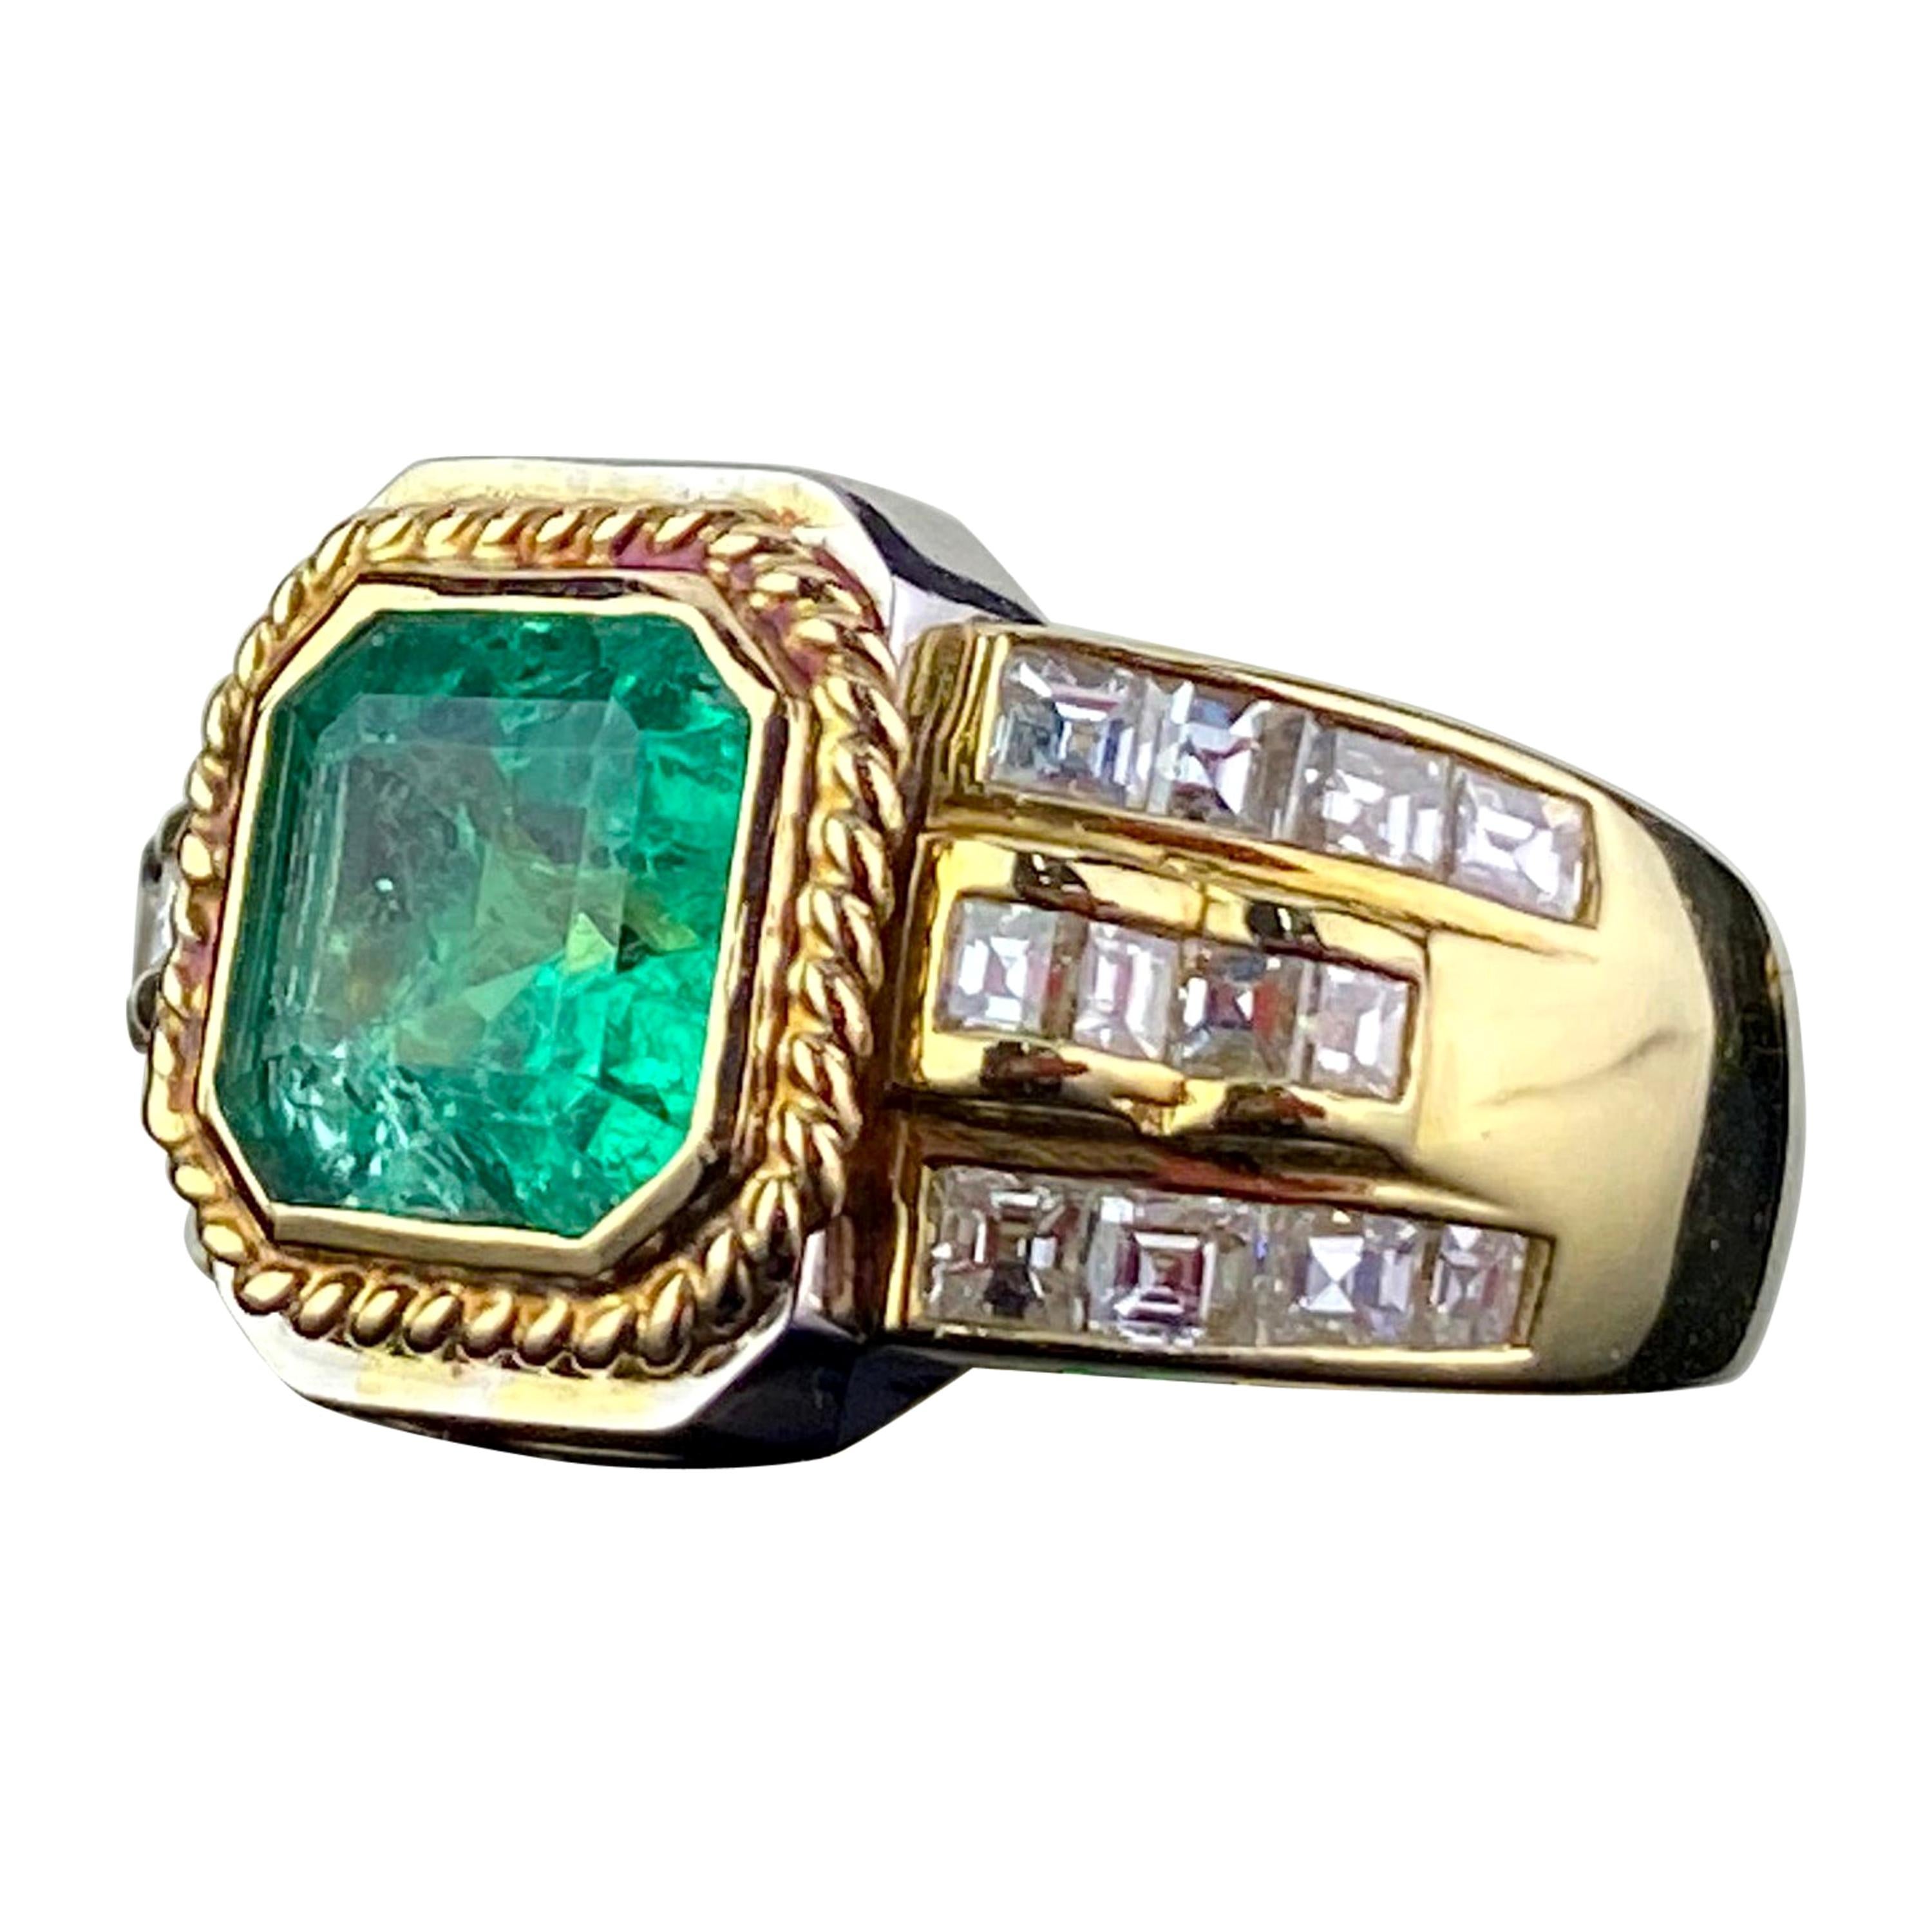 Certified 2.09 Carat Colombian Emerald and Diamond Ring